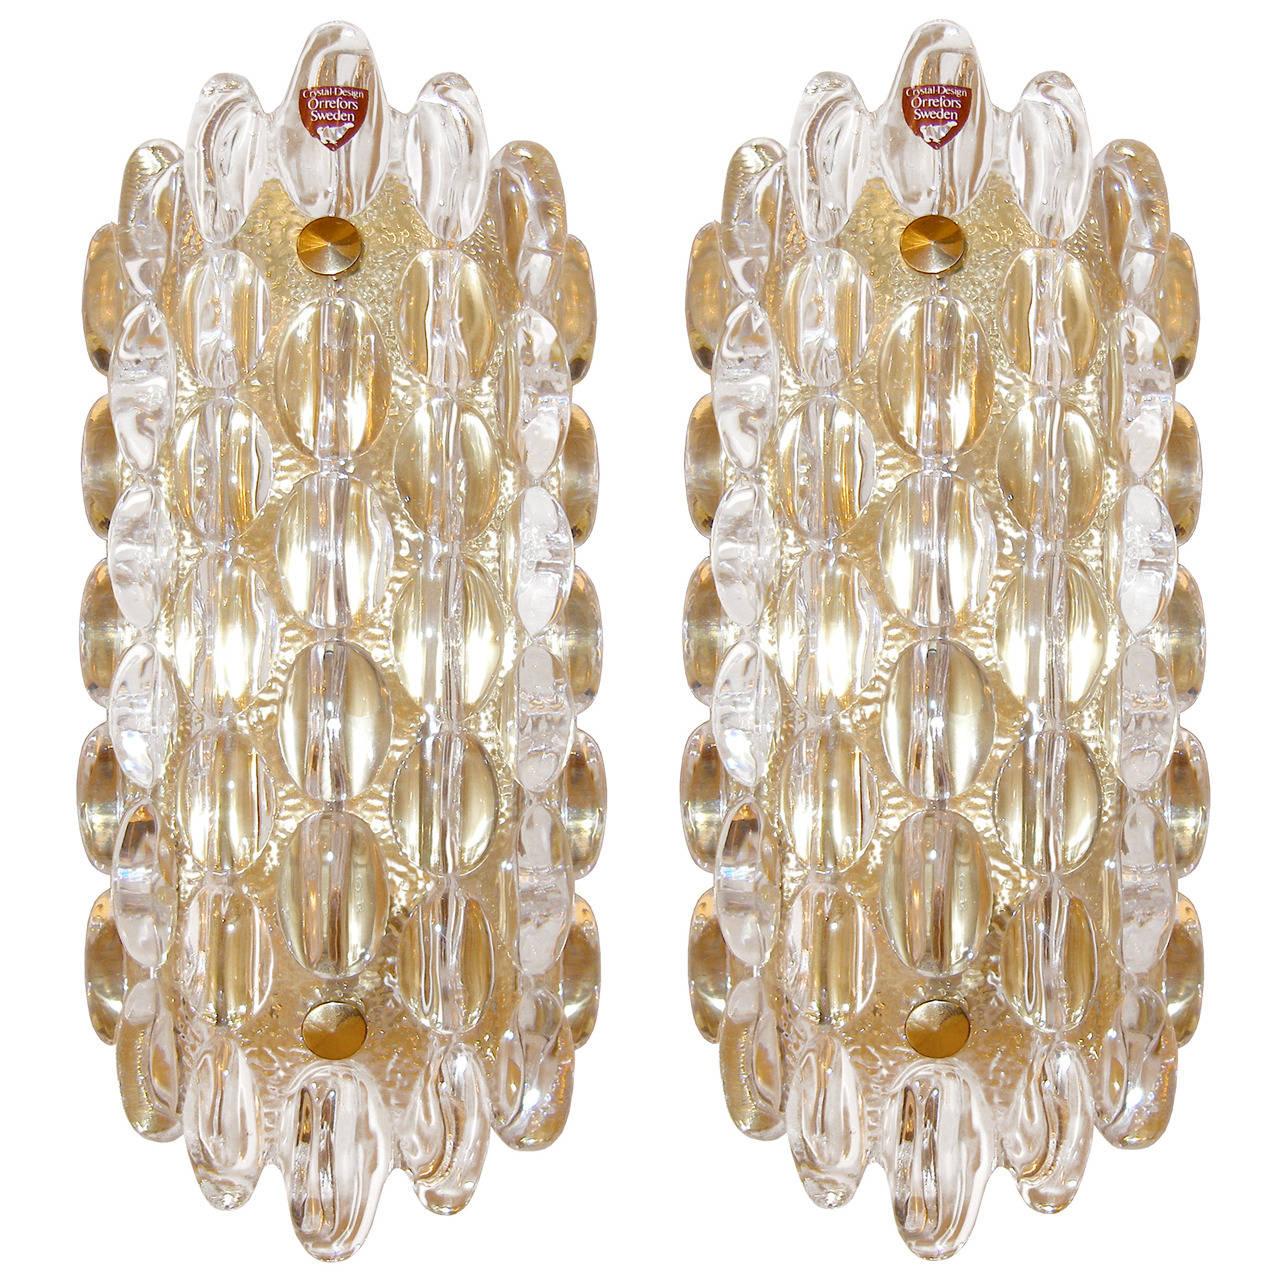 A pair of glass sconces with large glass bubbles mounted on a brass frame by Carl Fagerlund for Orrefors.

Swedish, Circa 1950's